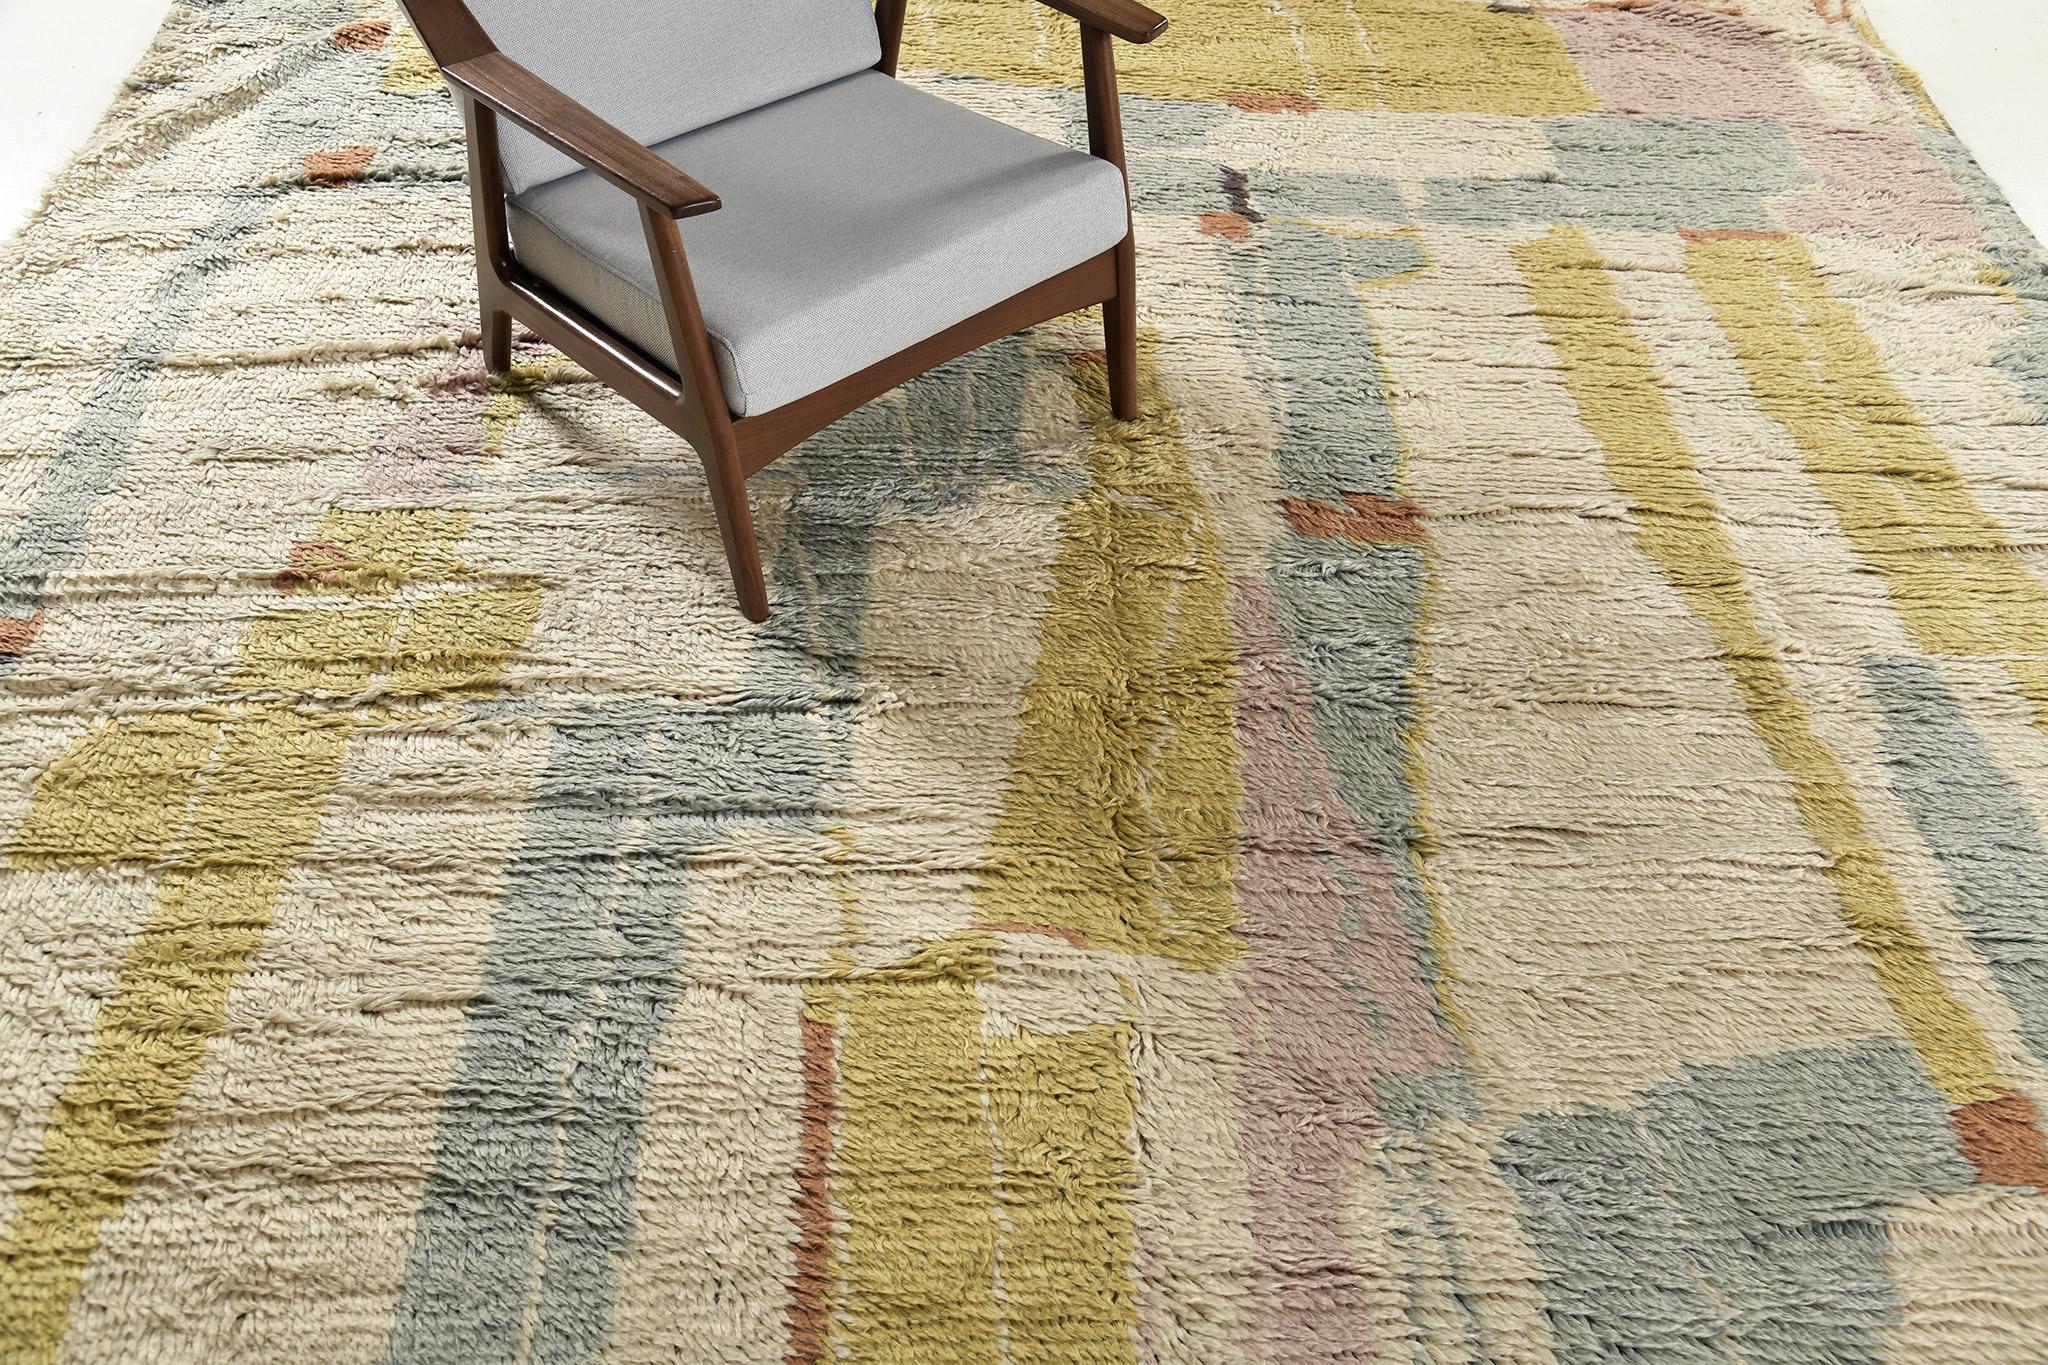 Amina has uneven embossed multicolored patches that are well-complemented with varieties of interiors. A timeless beauty that is easy to adapt to changes in setting. Adding this up in your spaces surely your guest will leave in awe.

Rug